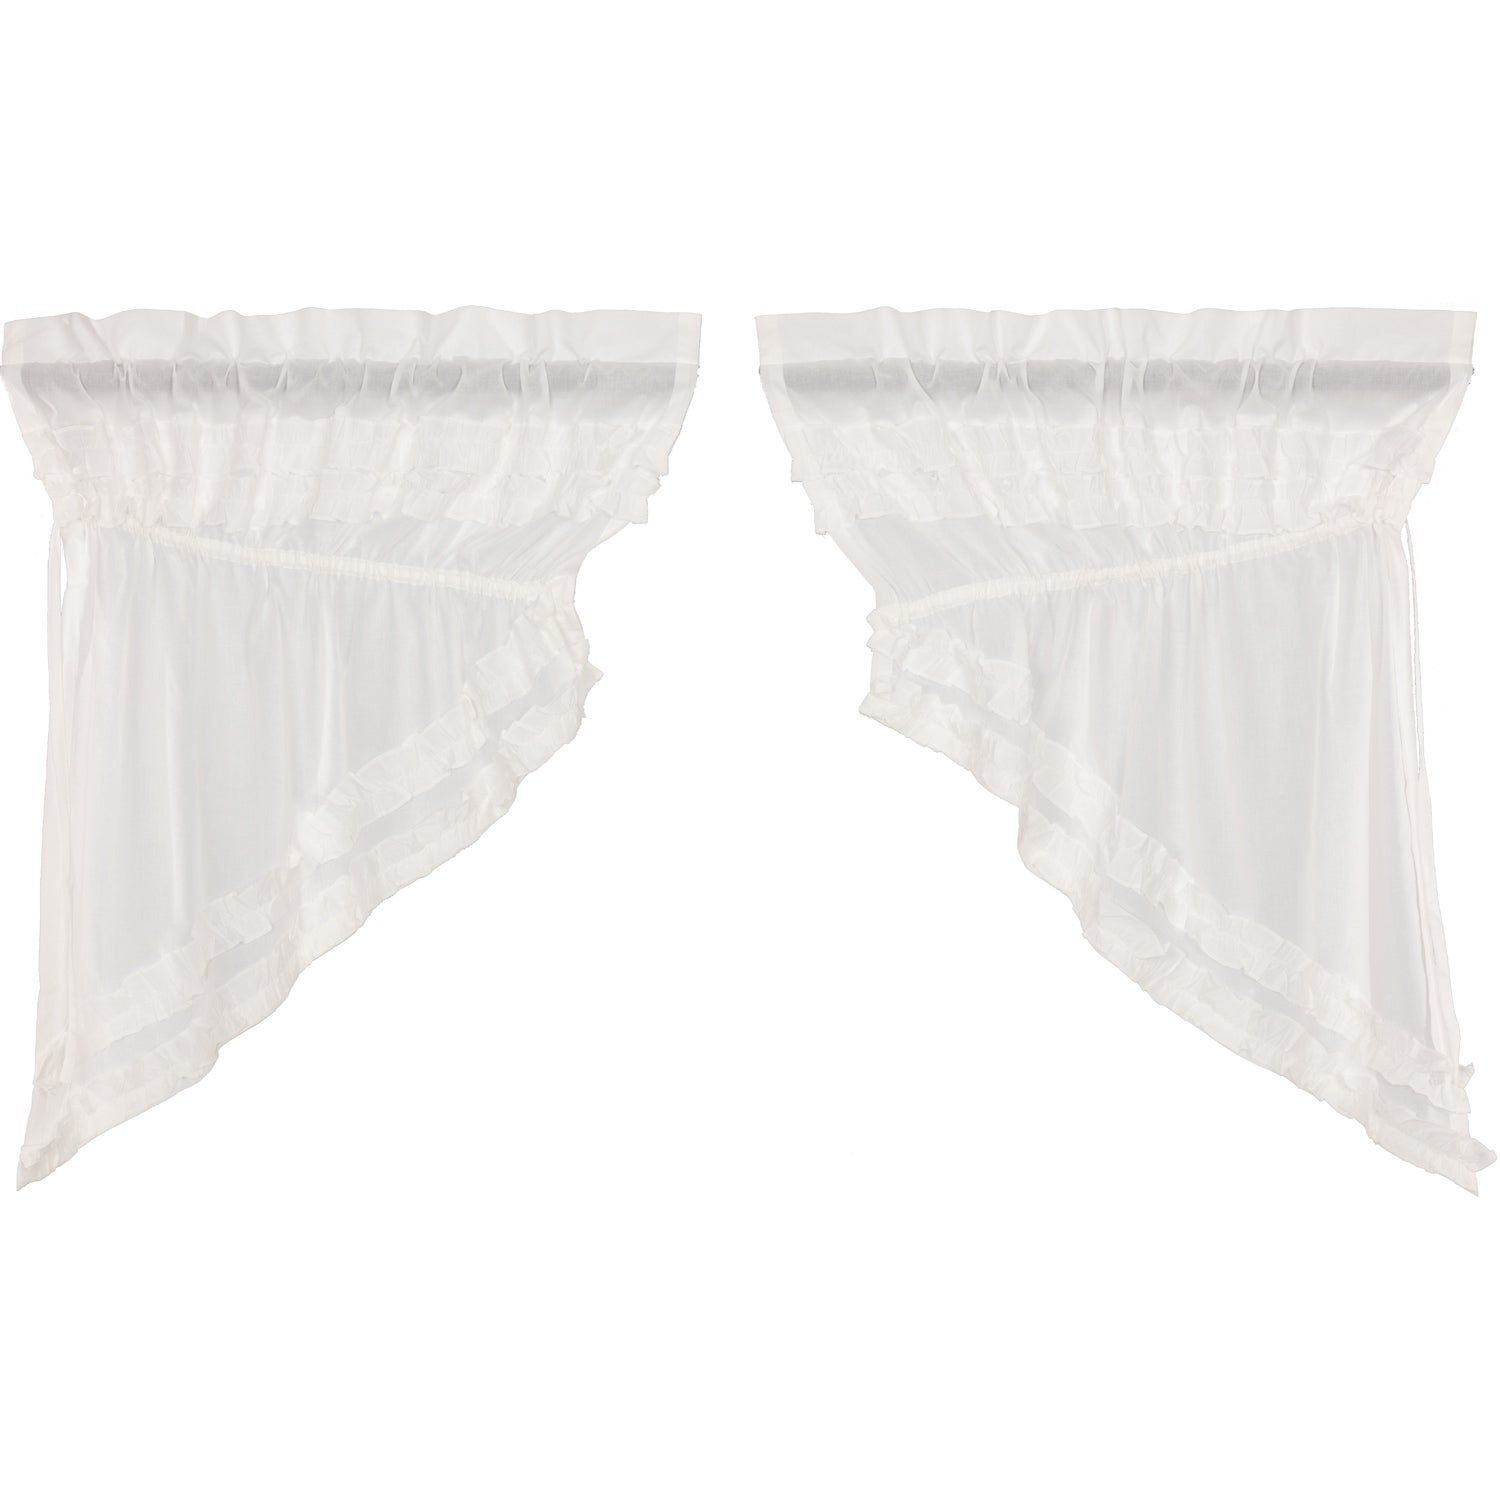 White Farmhouse Kitchen Curtains Vhc White Ruffled Sheer Petticoat Prairie  Swag Pair Rod Pocket Cotton Solid Color Sheer Inside Rod Pocket Cotton Solid Color Ruched Ruffle Kitchen Curtains (View 4 of 20)